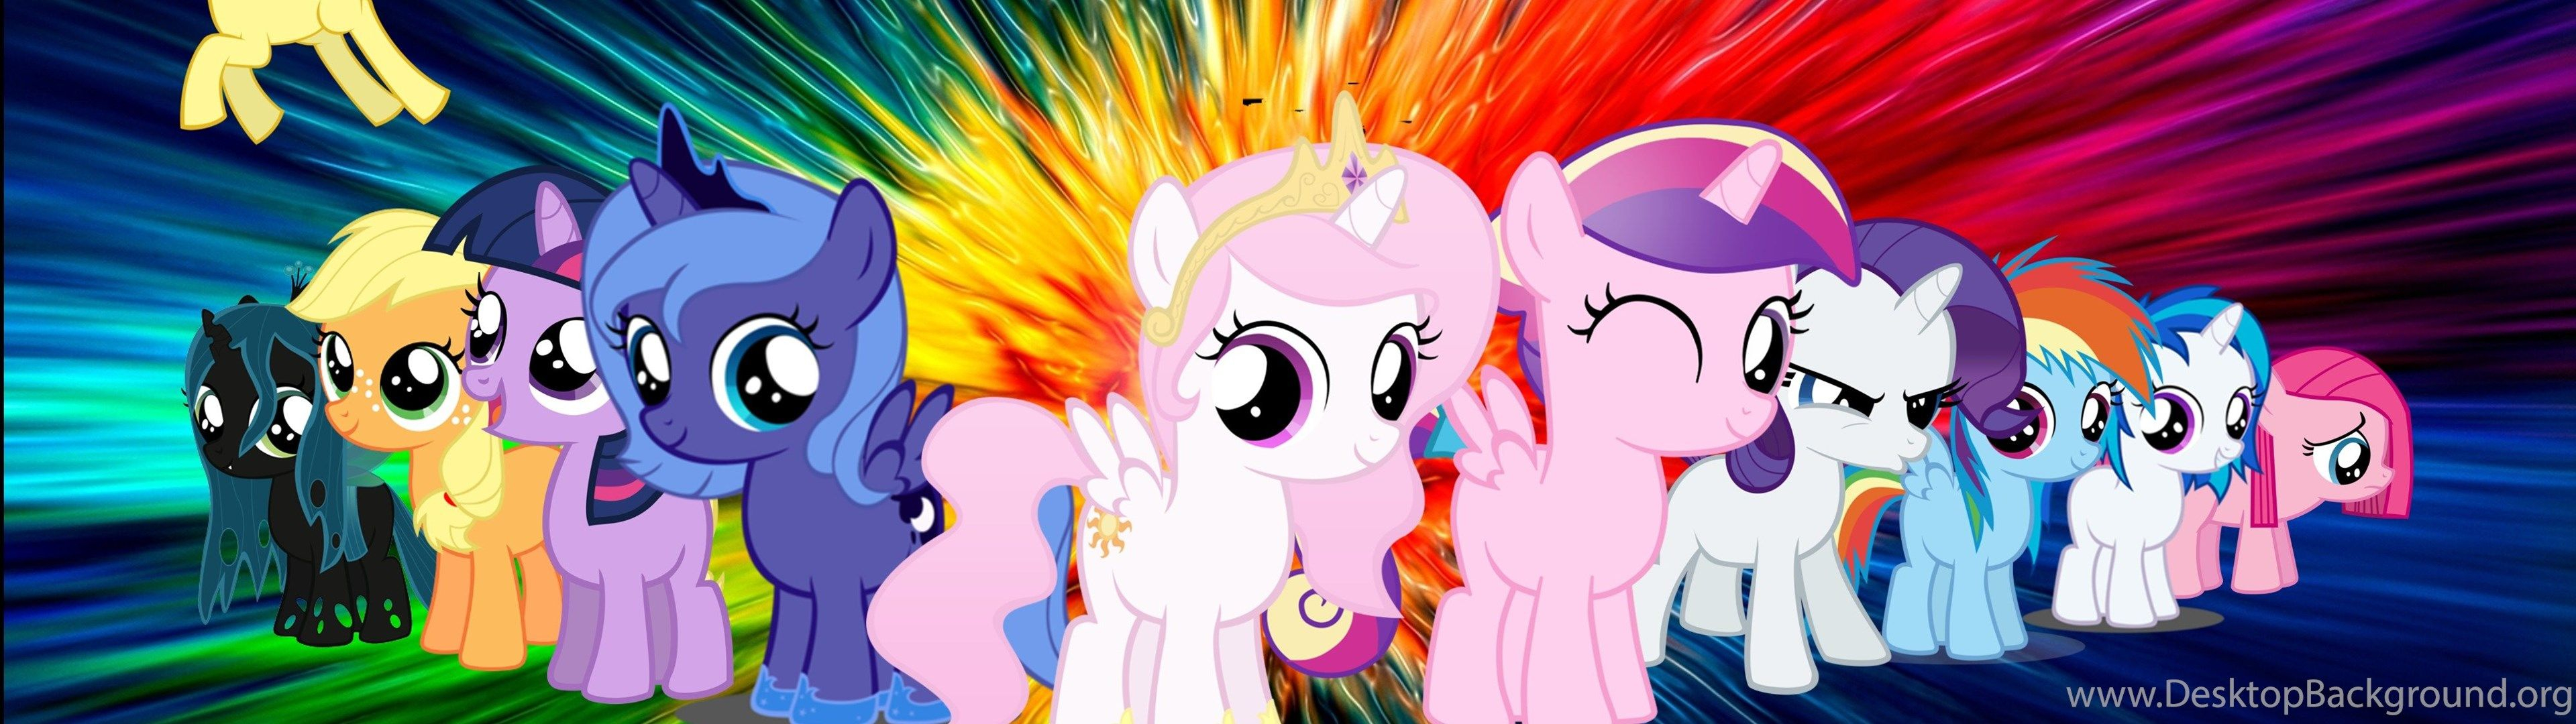 3840x1080 My Little Pony Dual Screen Wallpapers Top Free My Little Pony Dual Screen Backgrounds